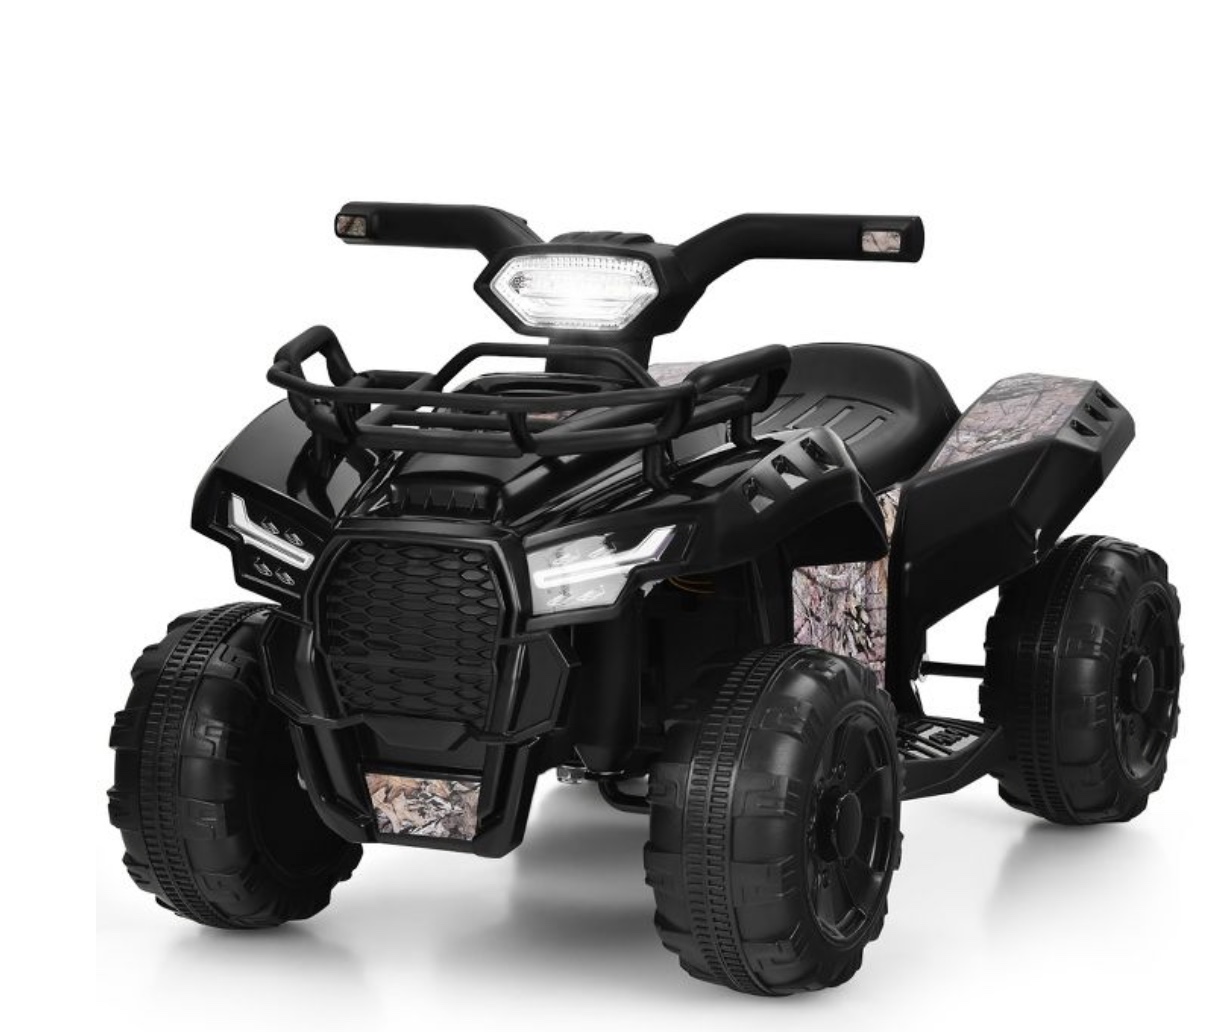 Costway 6V Kids ATV Quad Electric Ride On Car Toy Toddler with LED Light MP3 $81.99